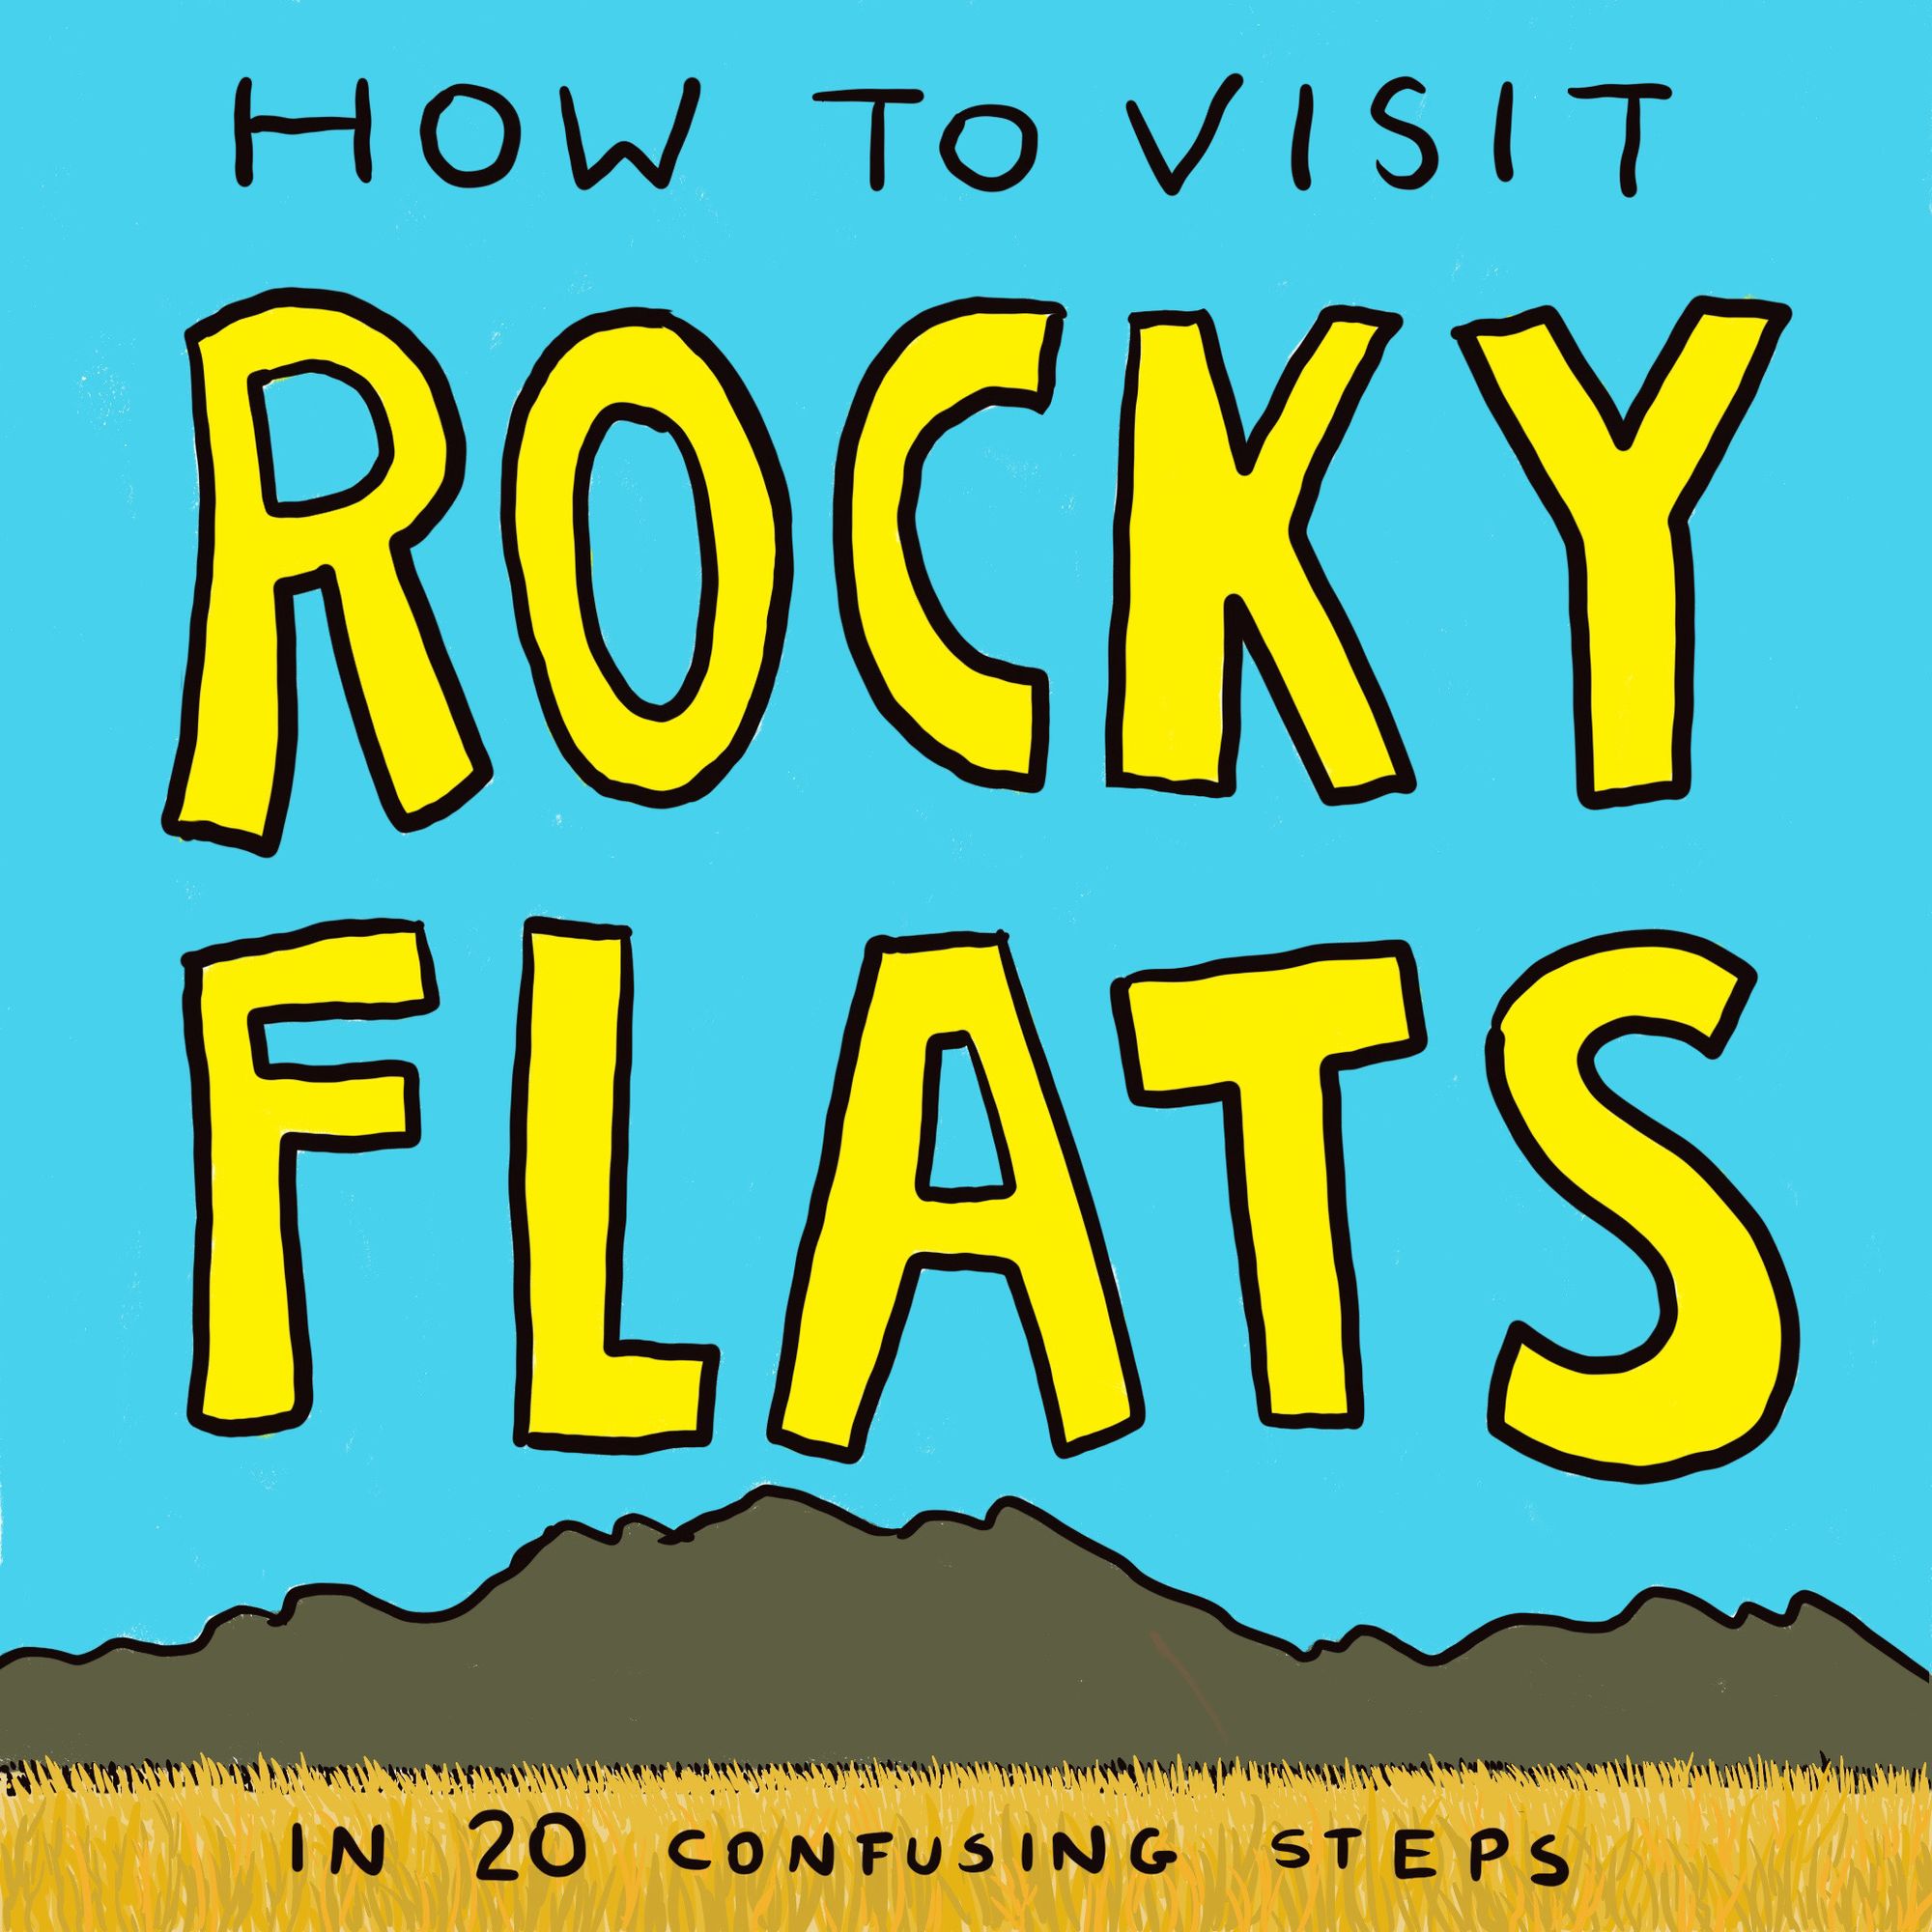 How To Visit Rocky Flats in 20 Confusing Steps